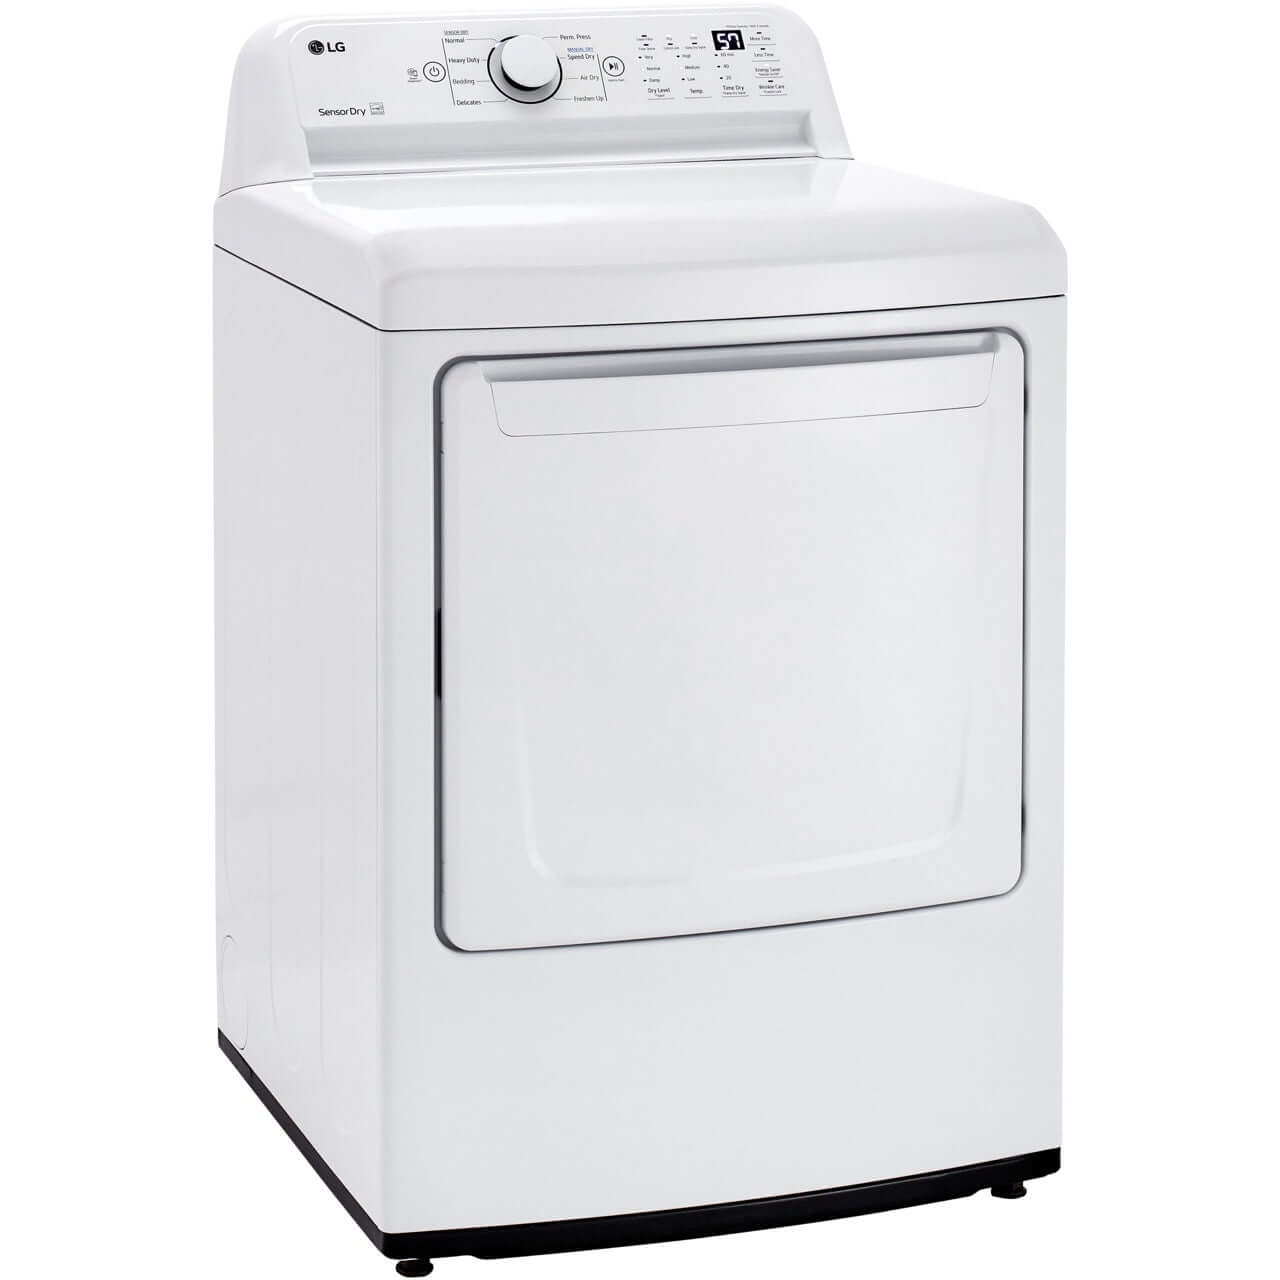 LG 7.3-Cu. Ft. Ultra Large Capacity Gas Dryer with Sensor Dry Technology (DLG7001W)